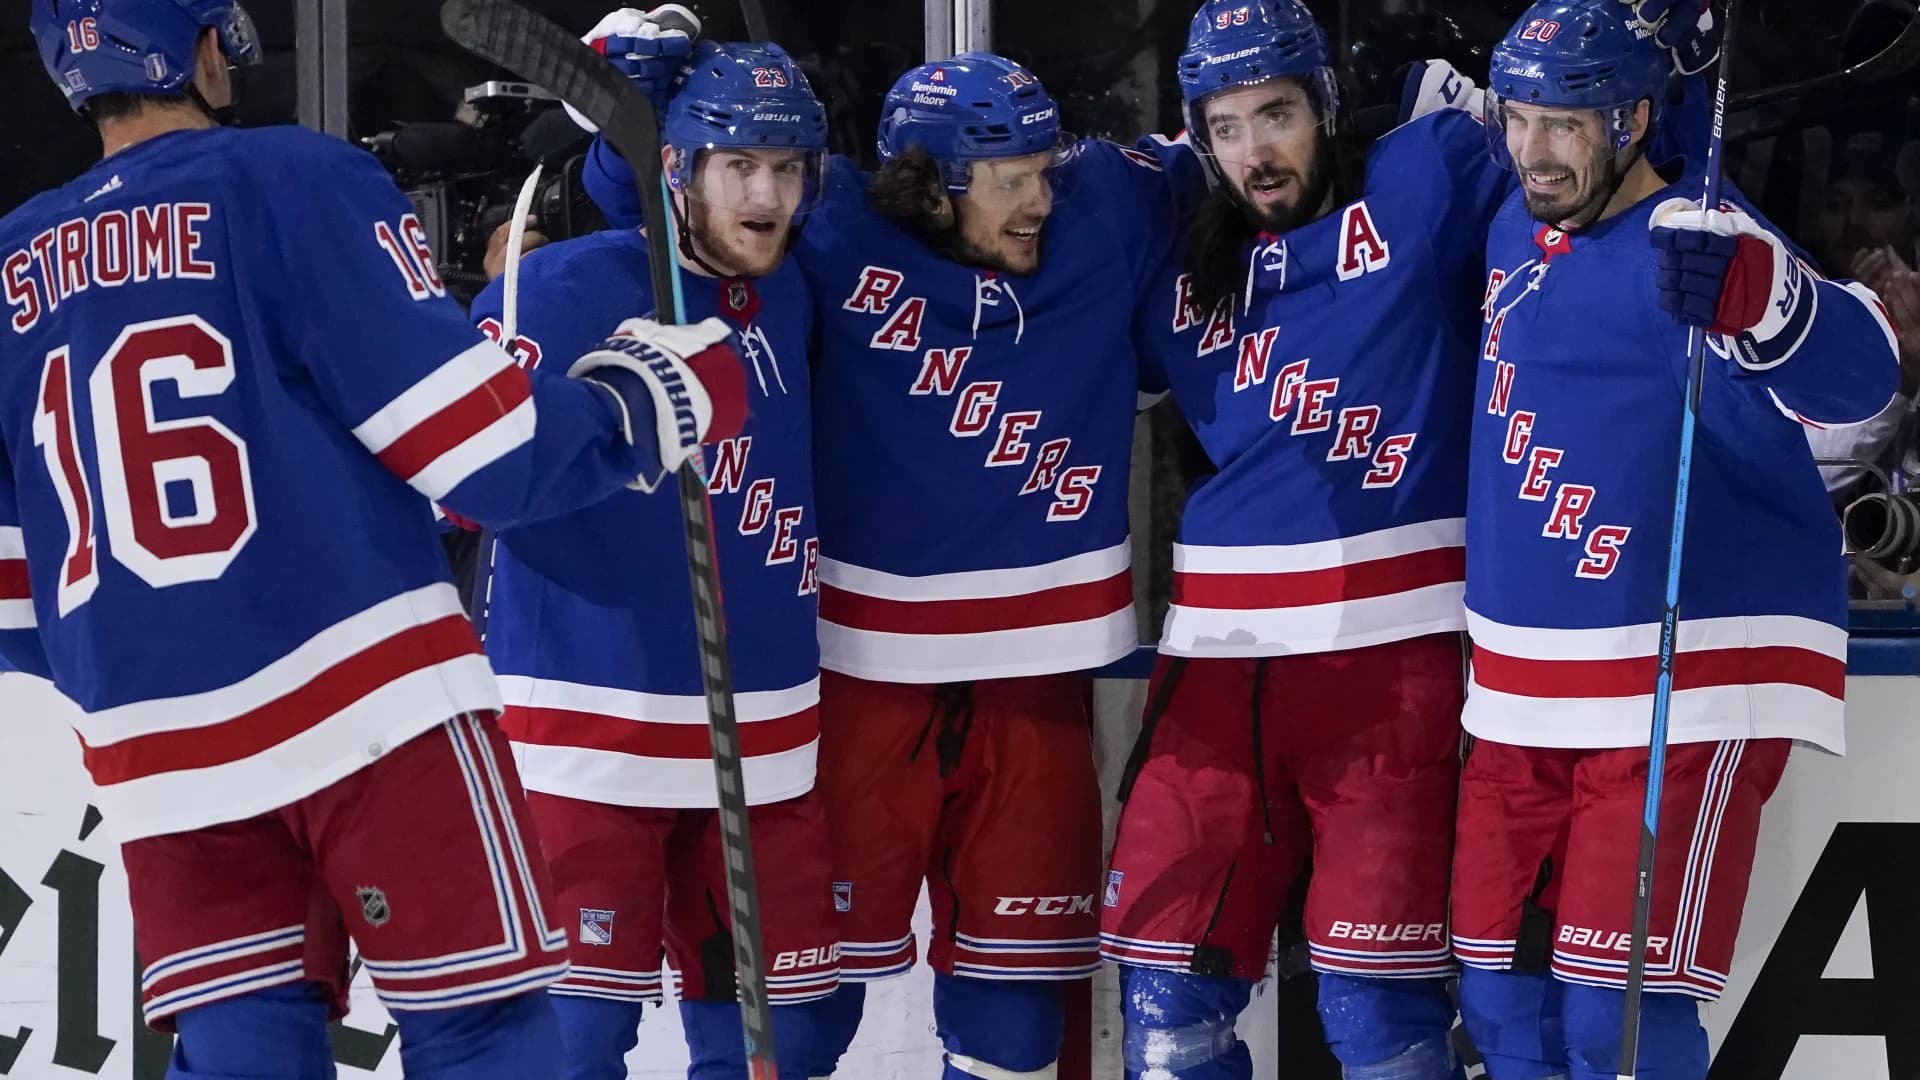 Chytil scores 2, Rangers beat Hurricanes 5-2 to force Game 7